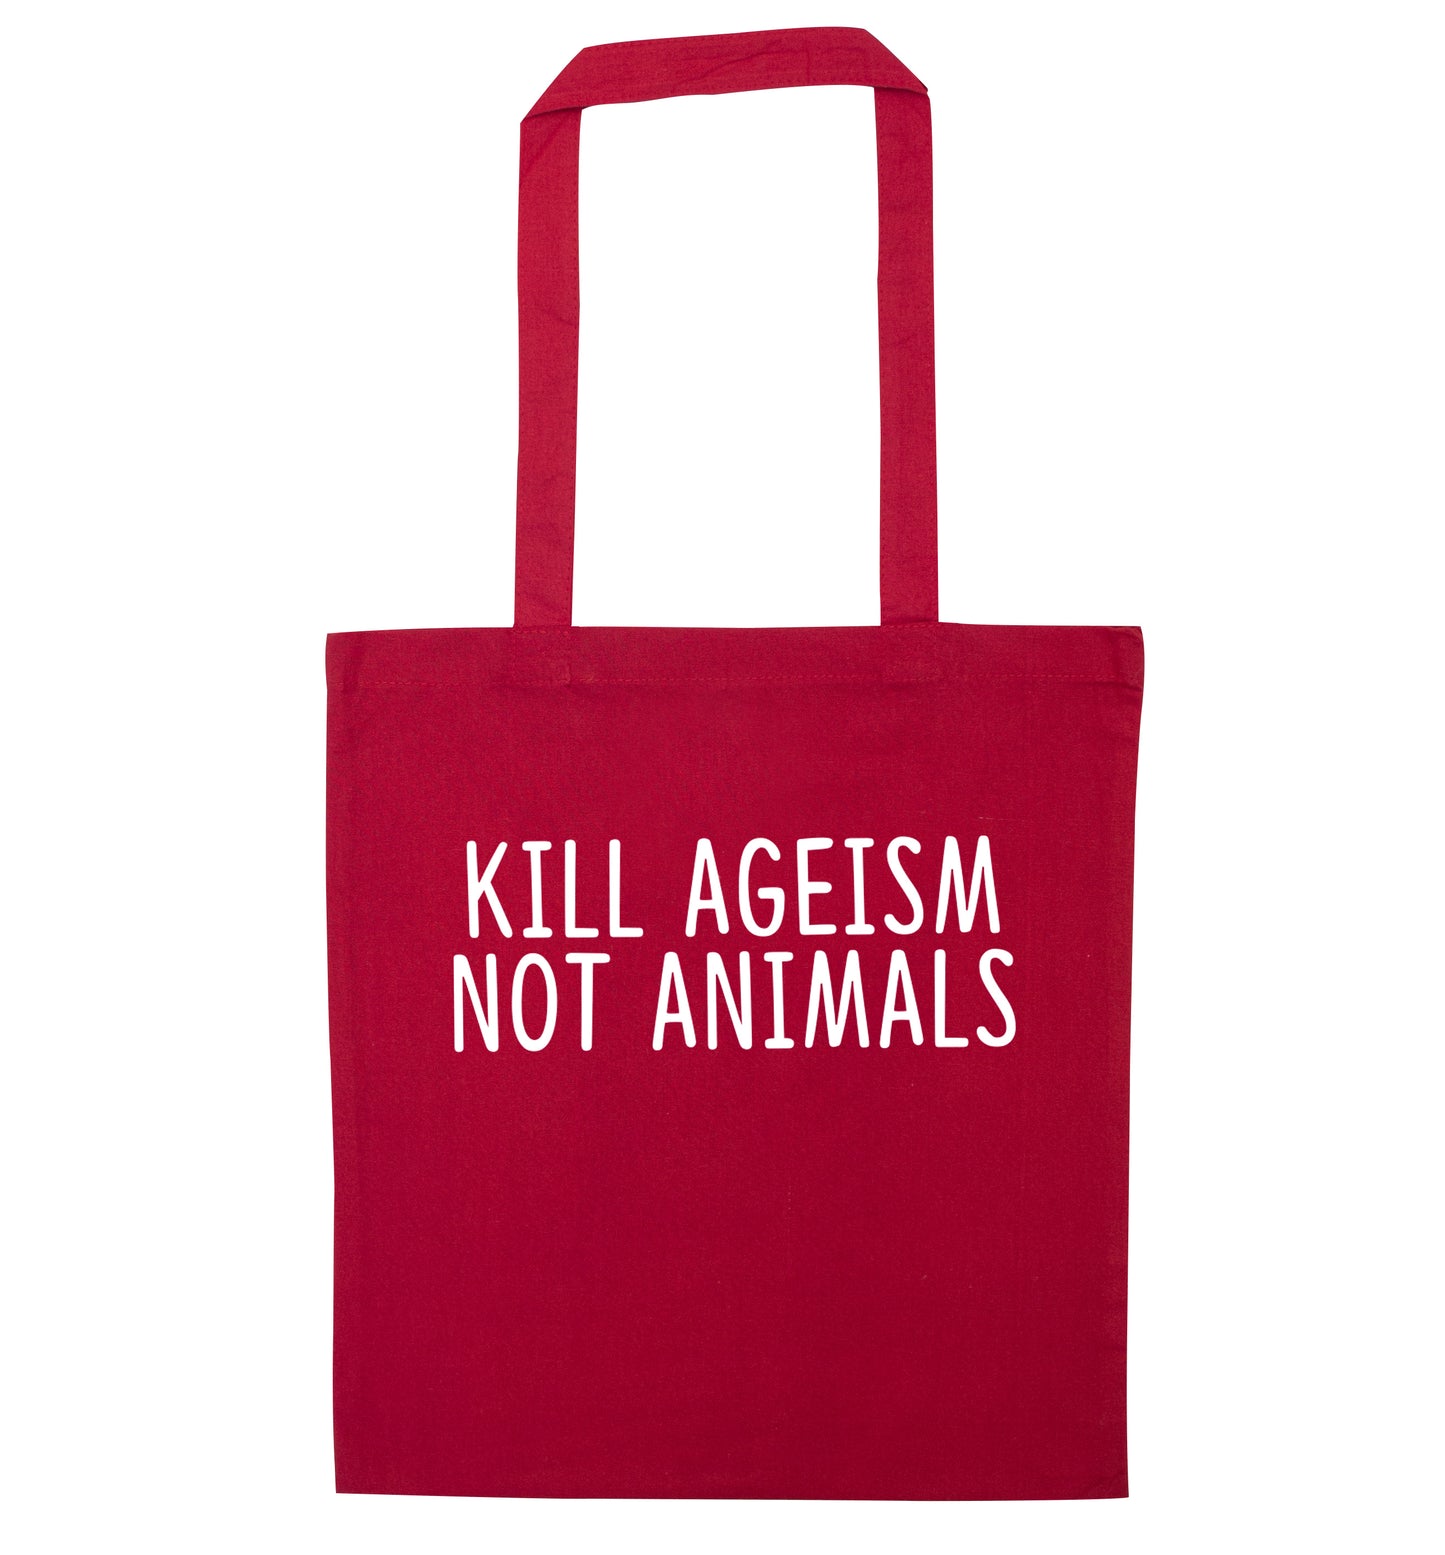 Kill Ageism Not Animals red tote bag